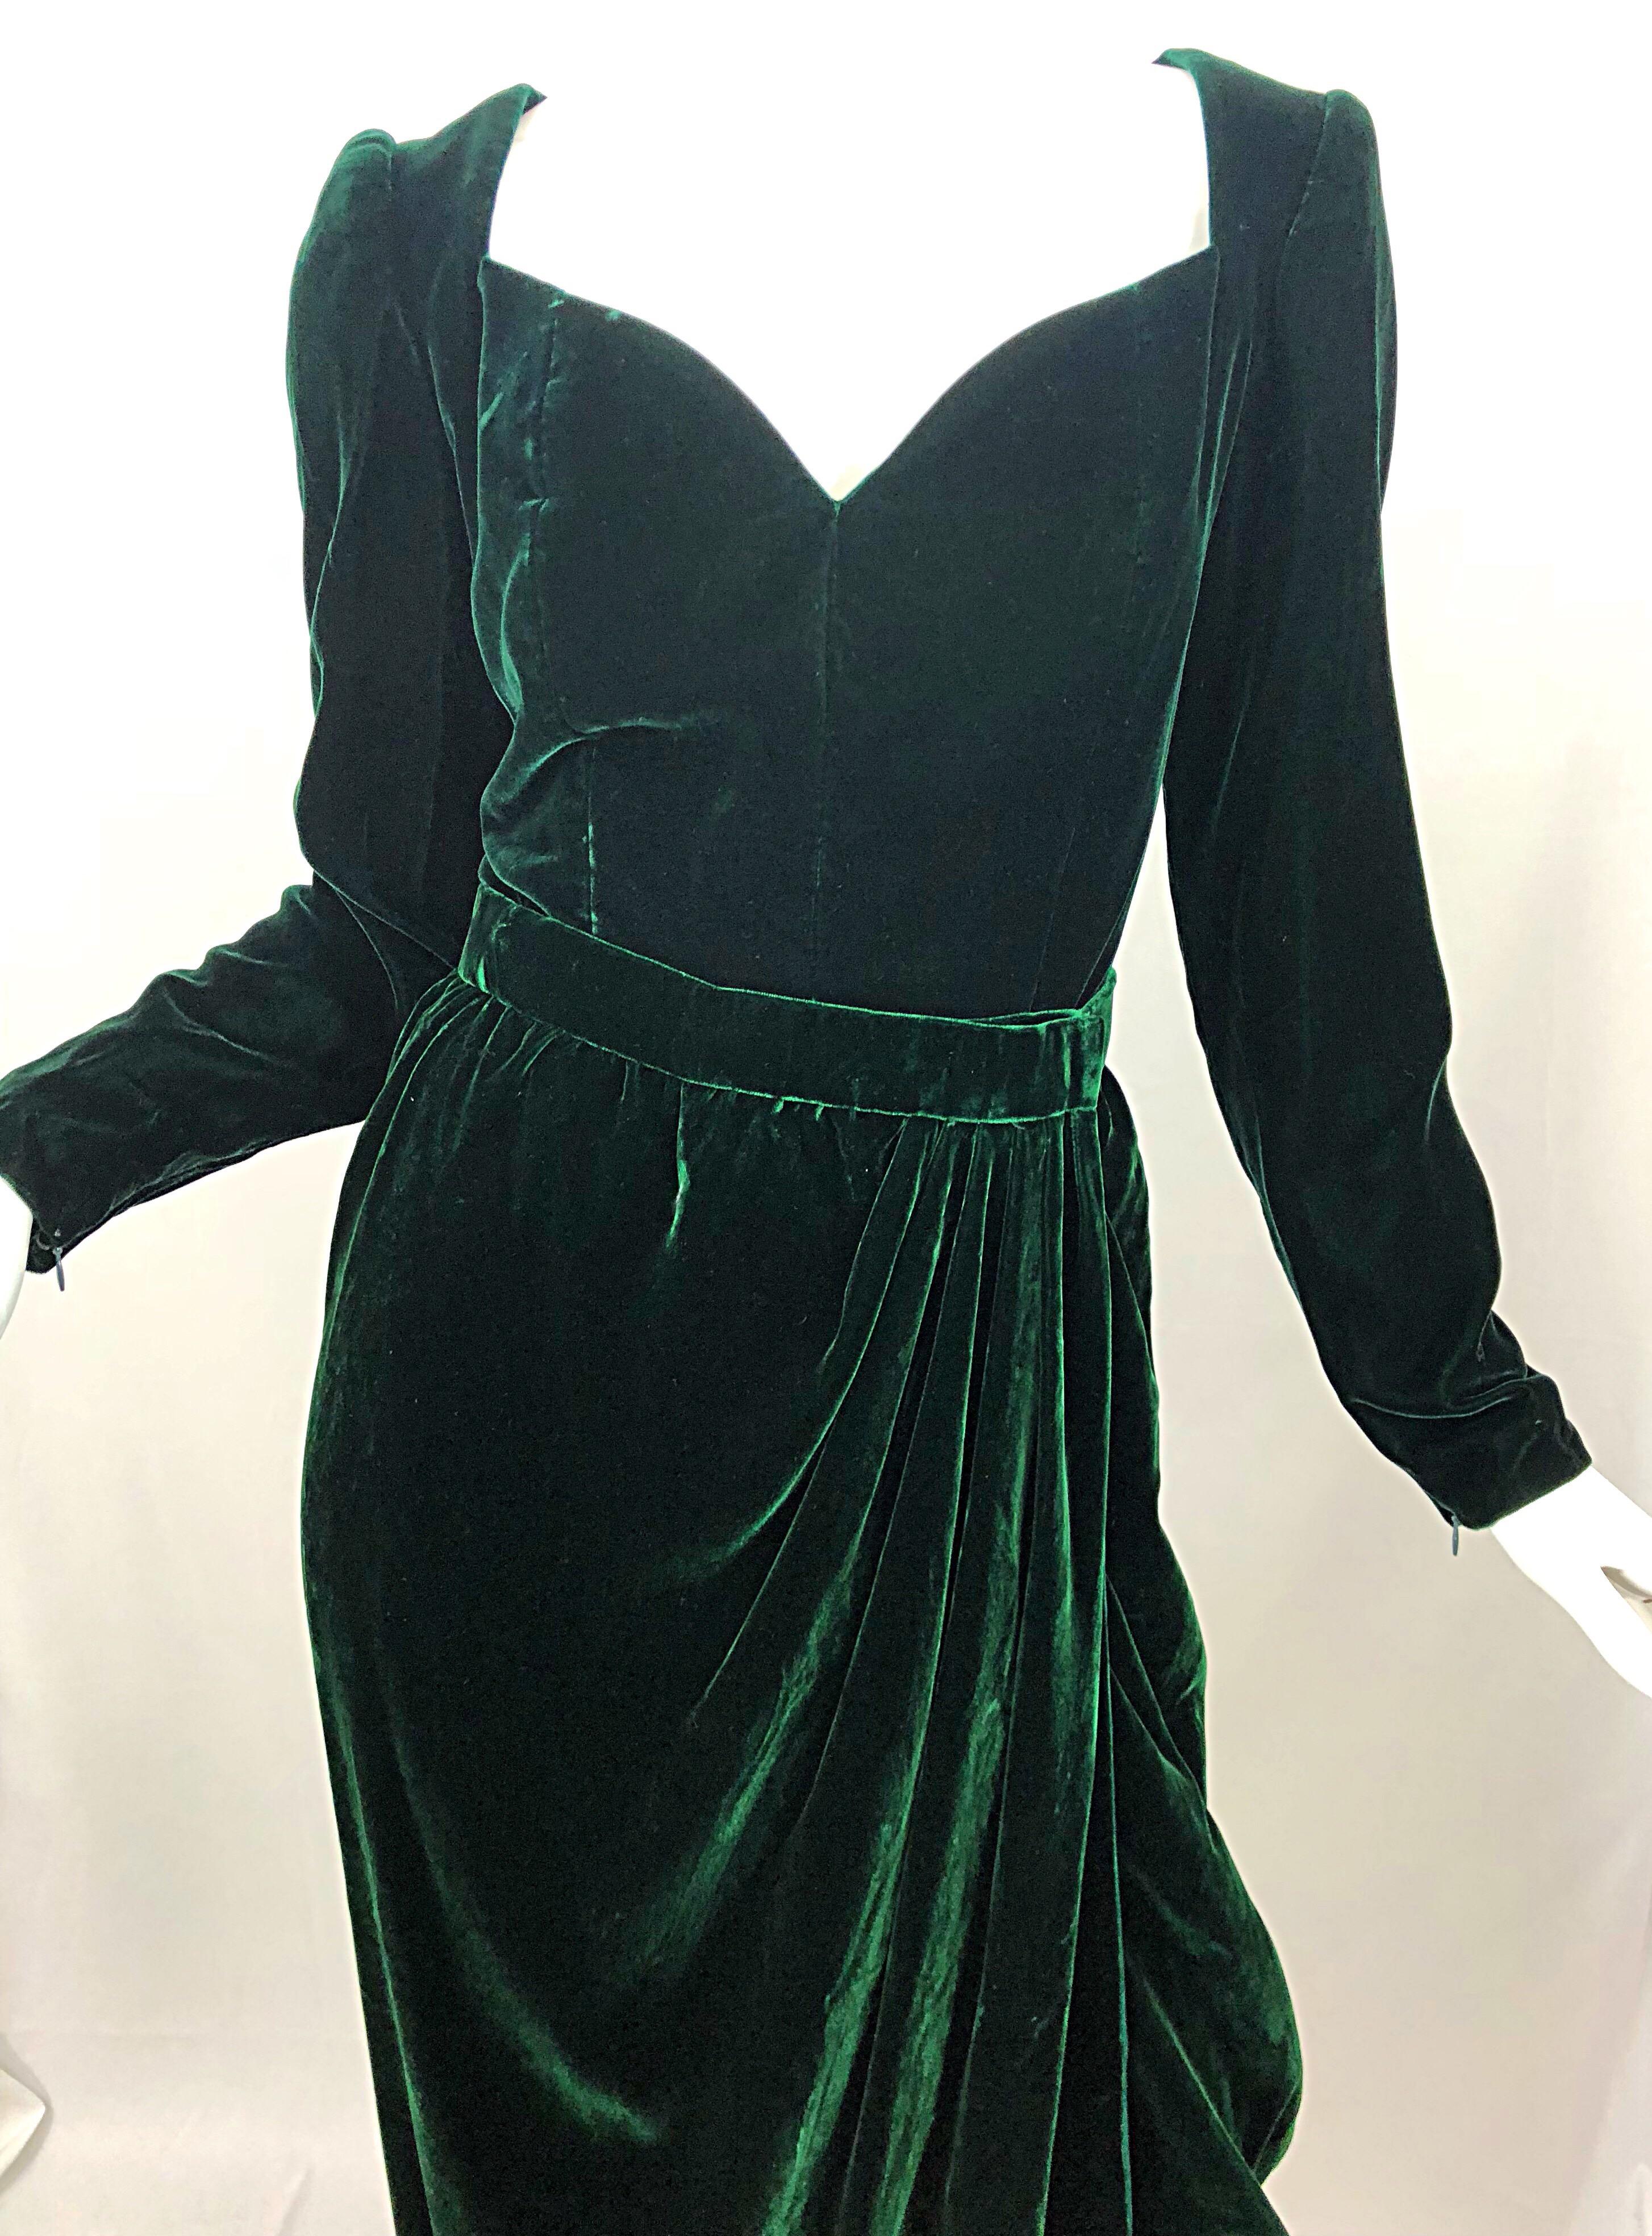 Beautiful vintage OSCAR DE LA RENTA 1990s hunter forest green silk velvet long sleeve top and wrap maxi skirt! The green was hard to photograph, but it is a beautiful true rich tone of hunter green. Features a boned bodice with a flattering